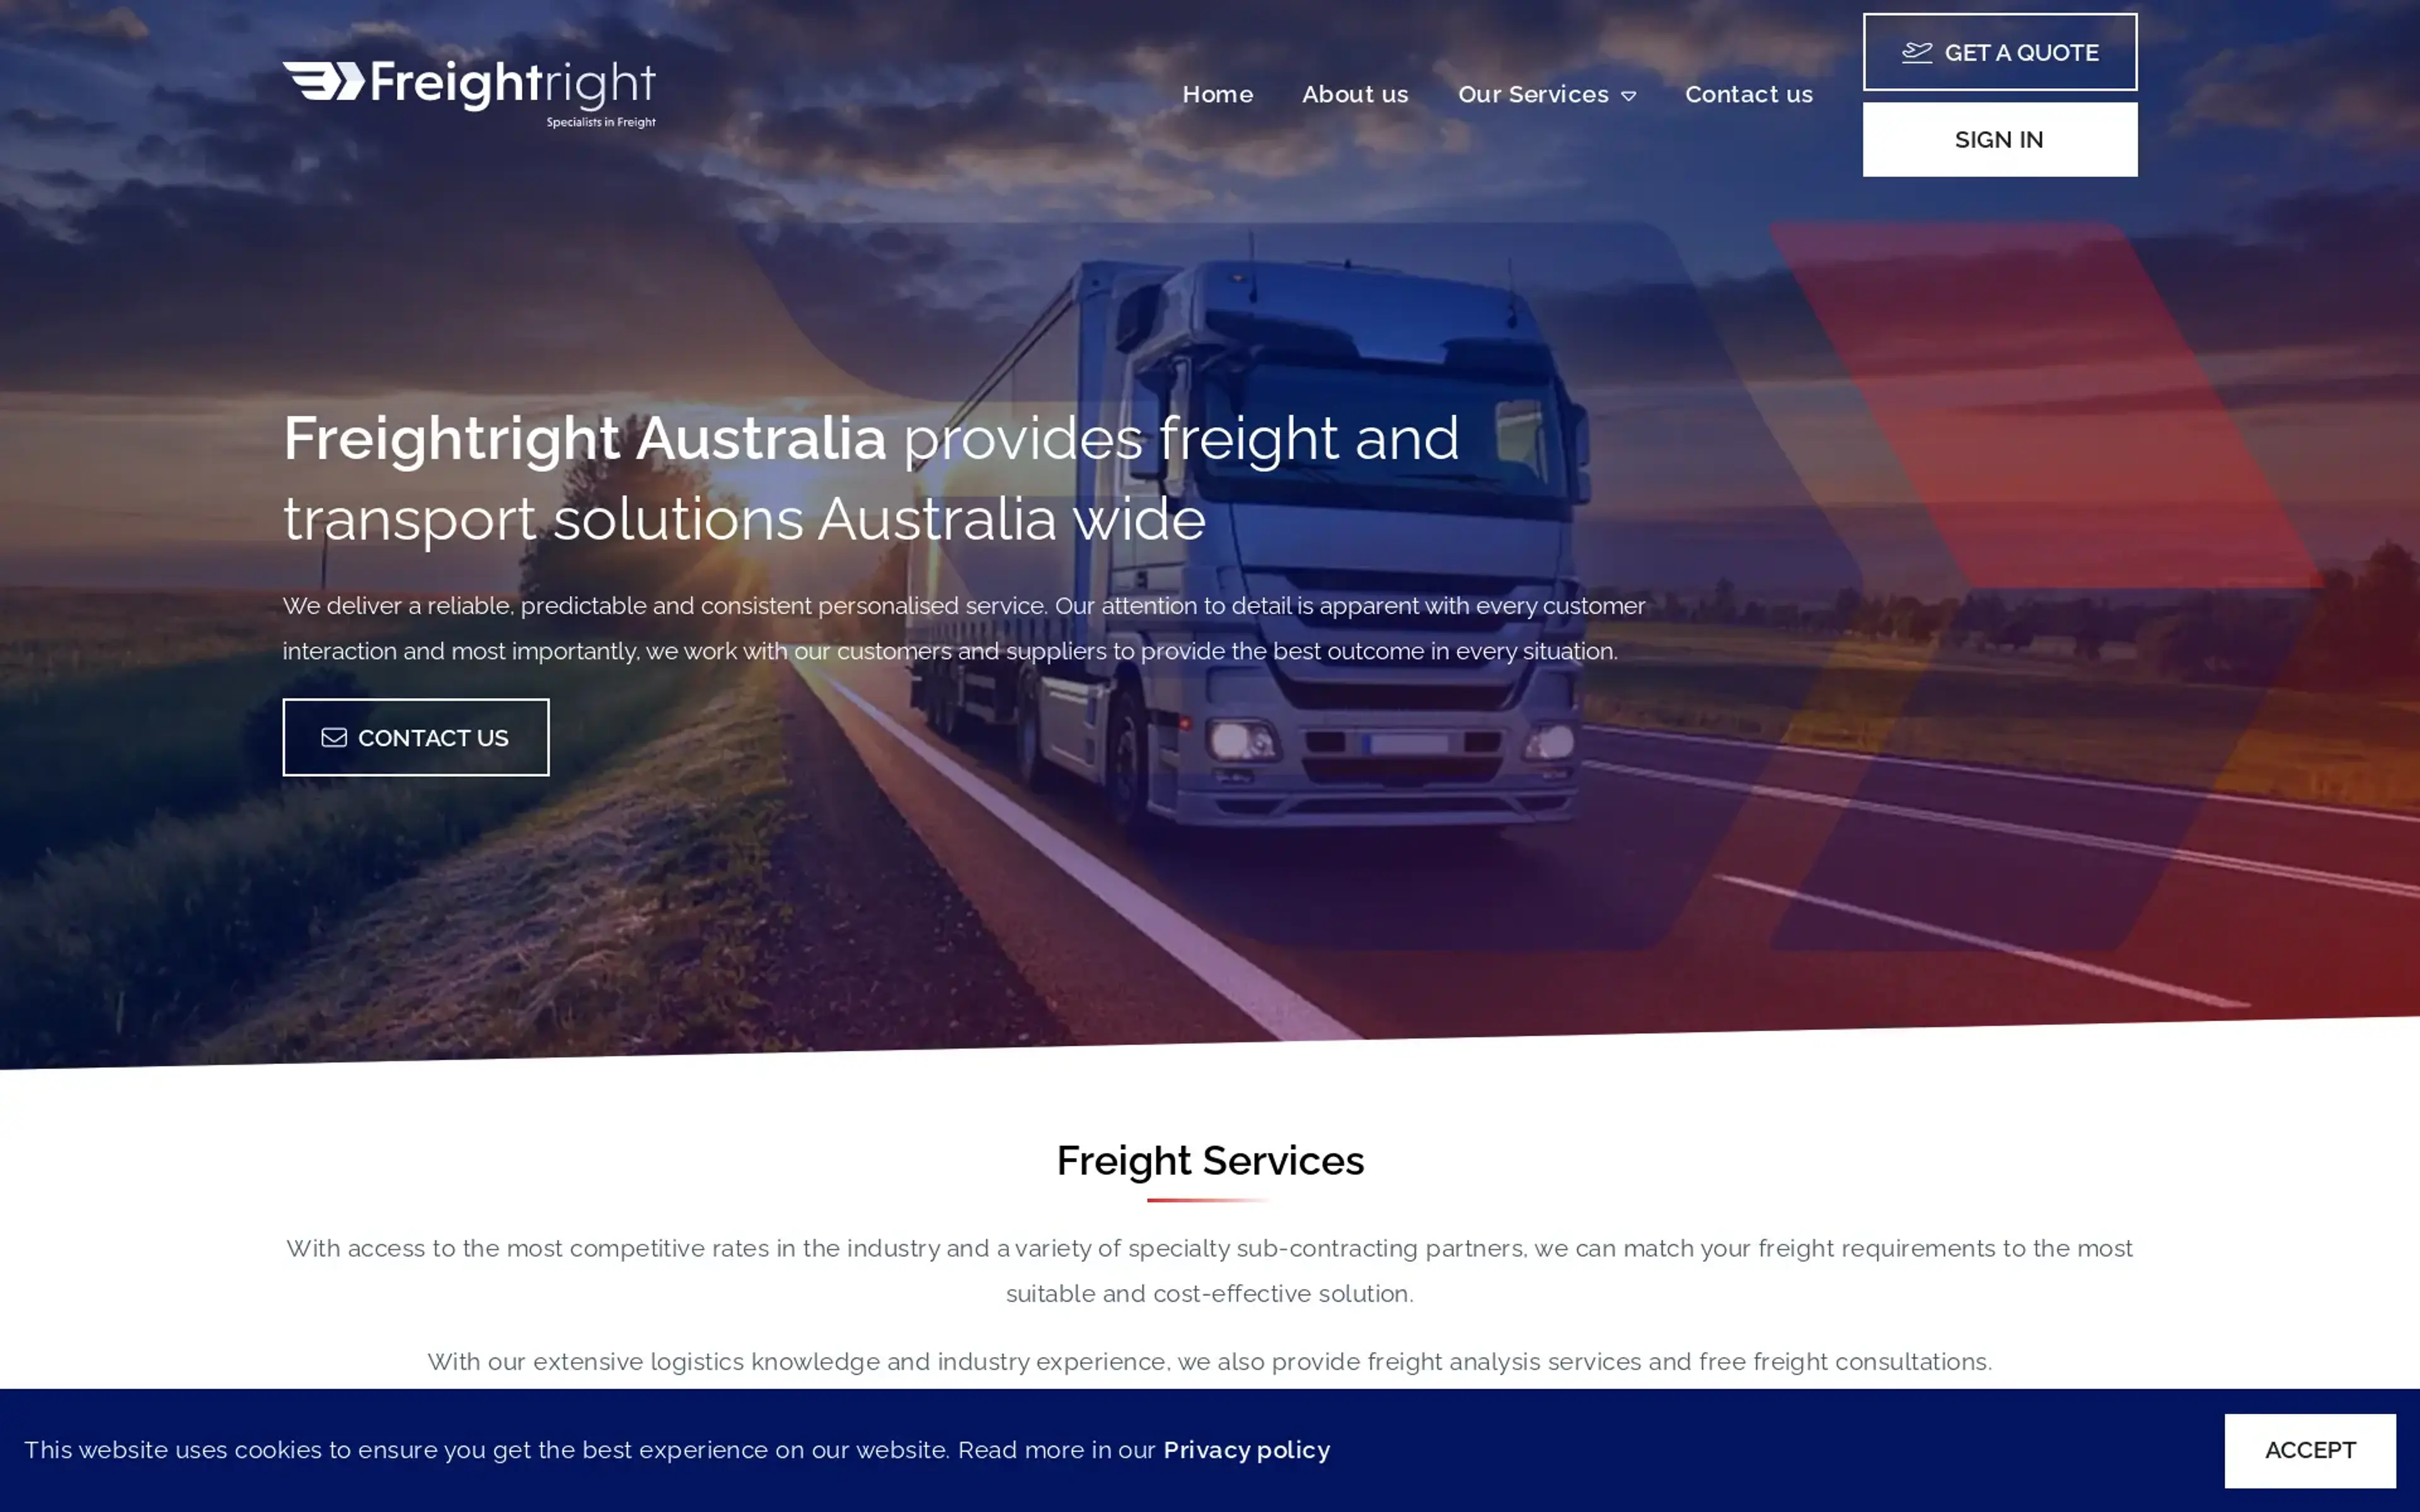 Recent project we worked on for Freightright